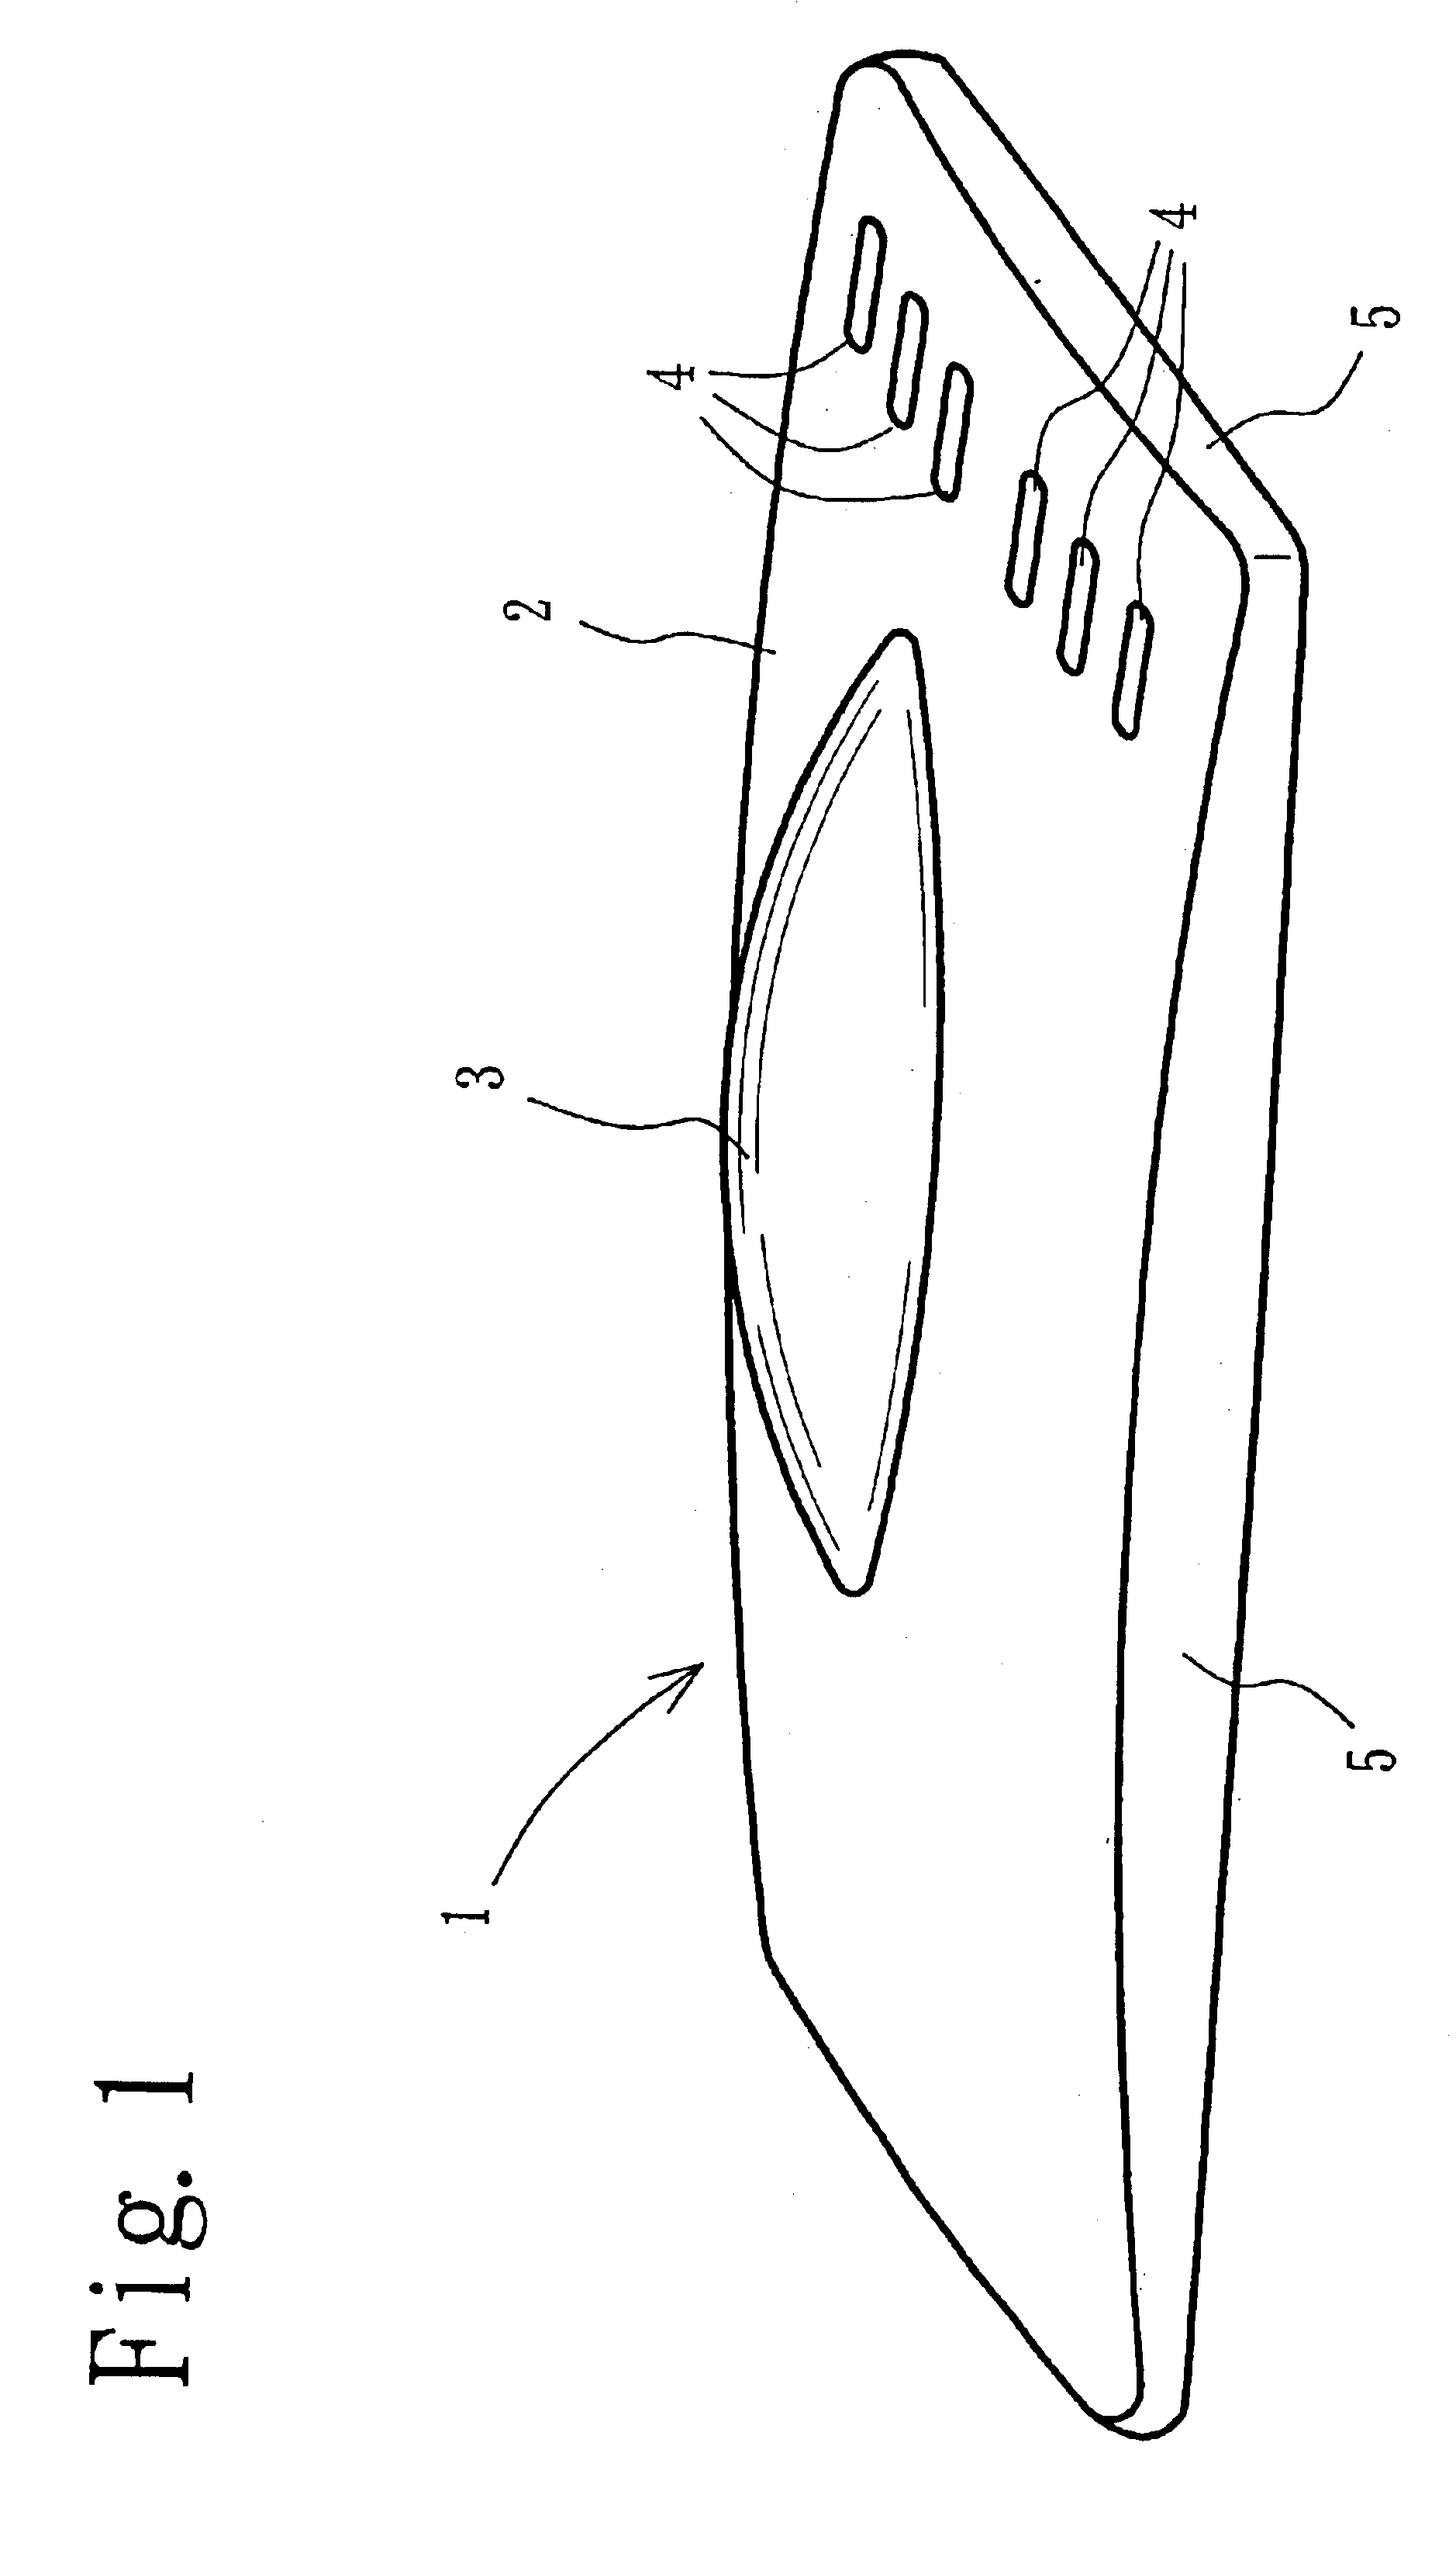 Sequential forming device